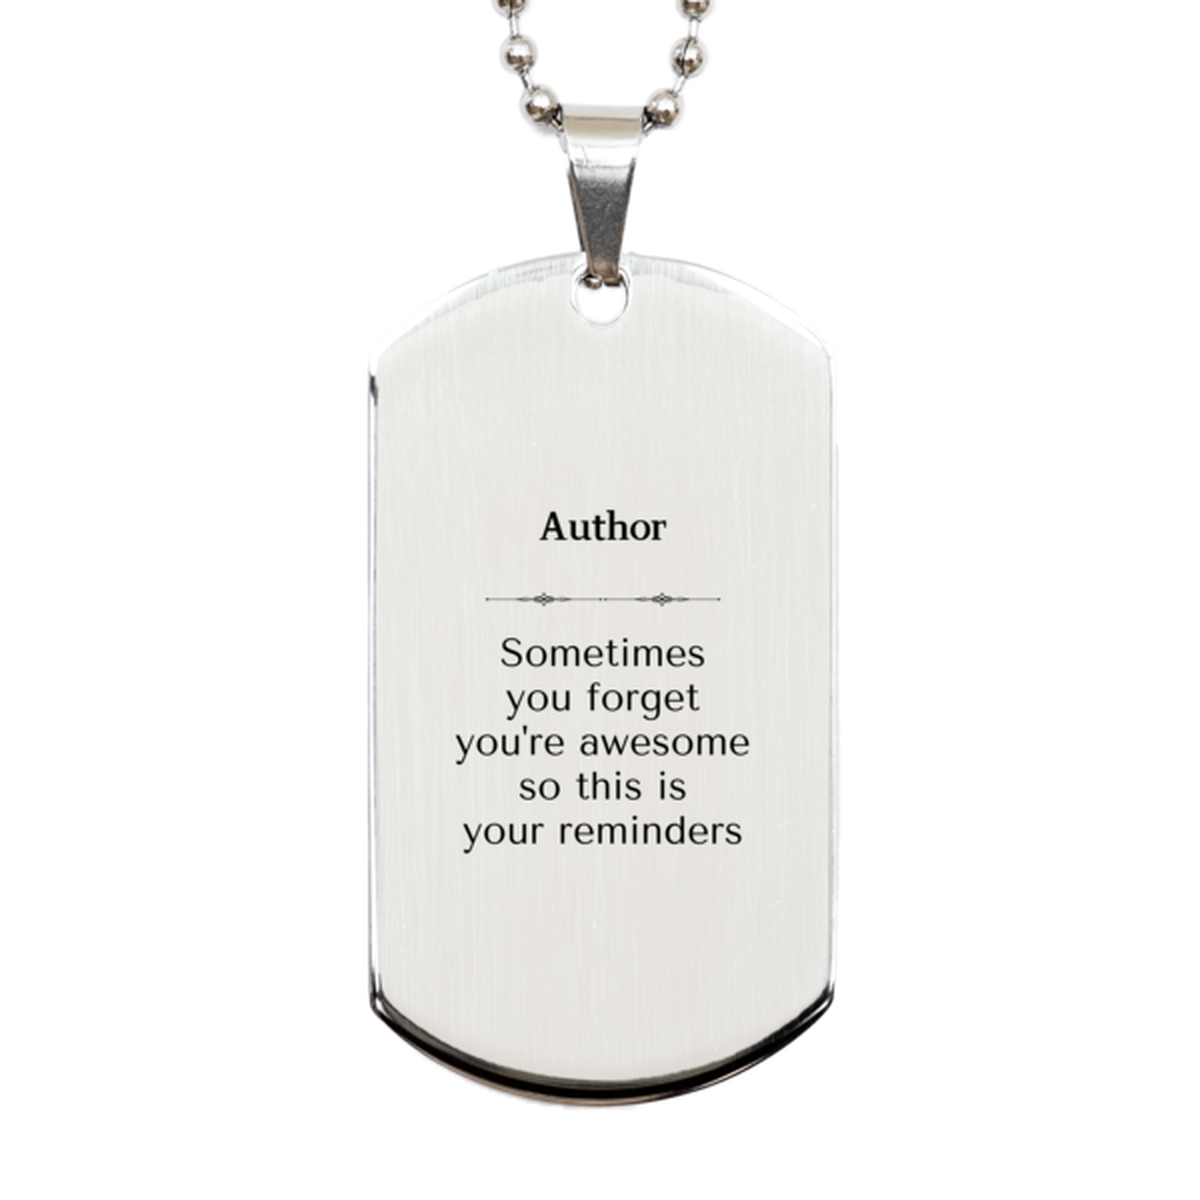 Sentimental Author Silver Dog Tag, Author Sometimes you forget you're awesome so this is your reminders, Graduation Christmas Birthday Gifts for Author, Men, Women, Coworkers